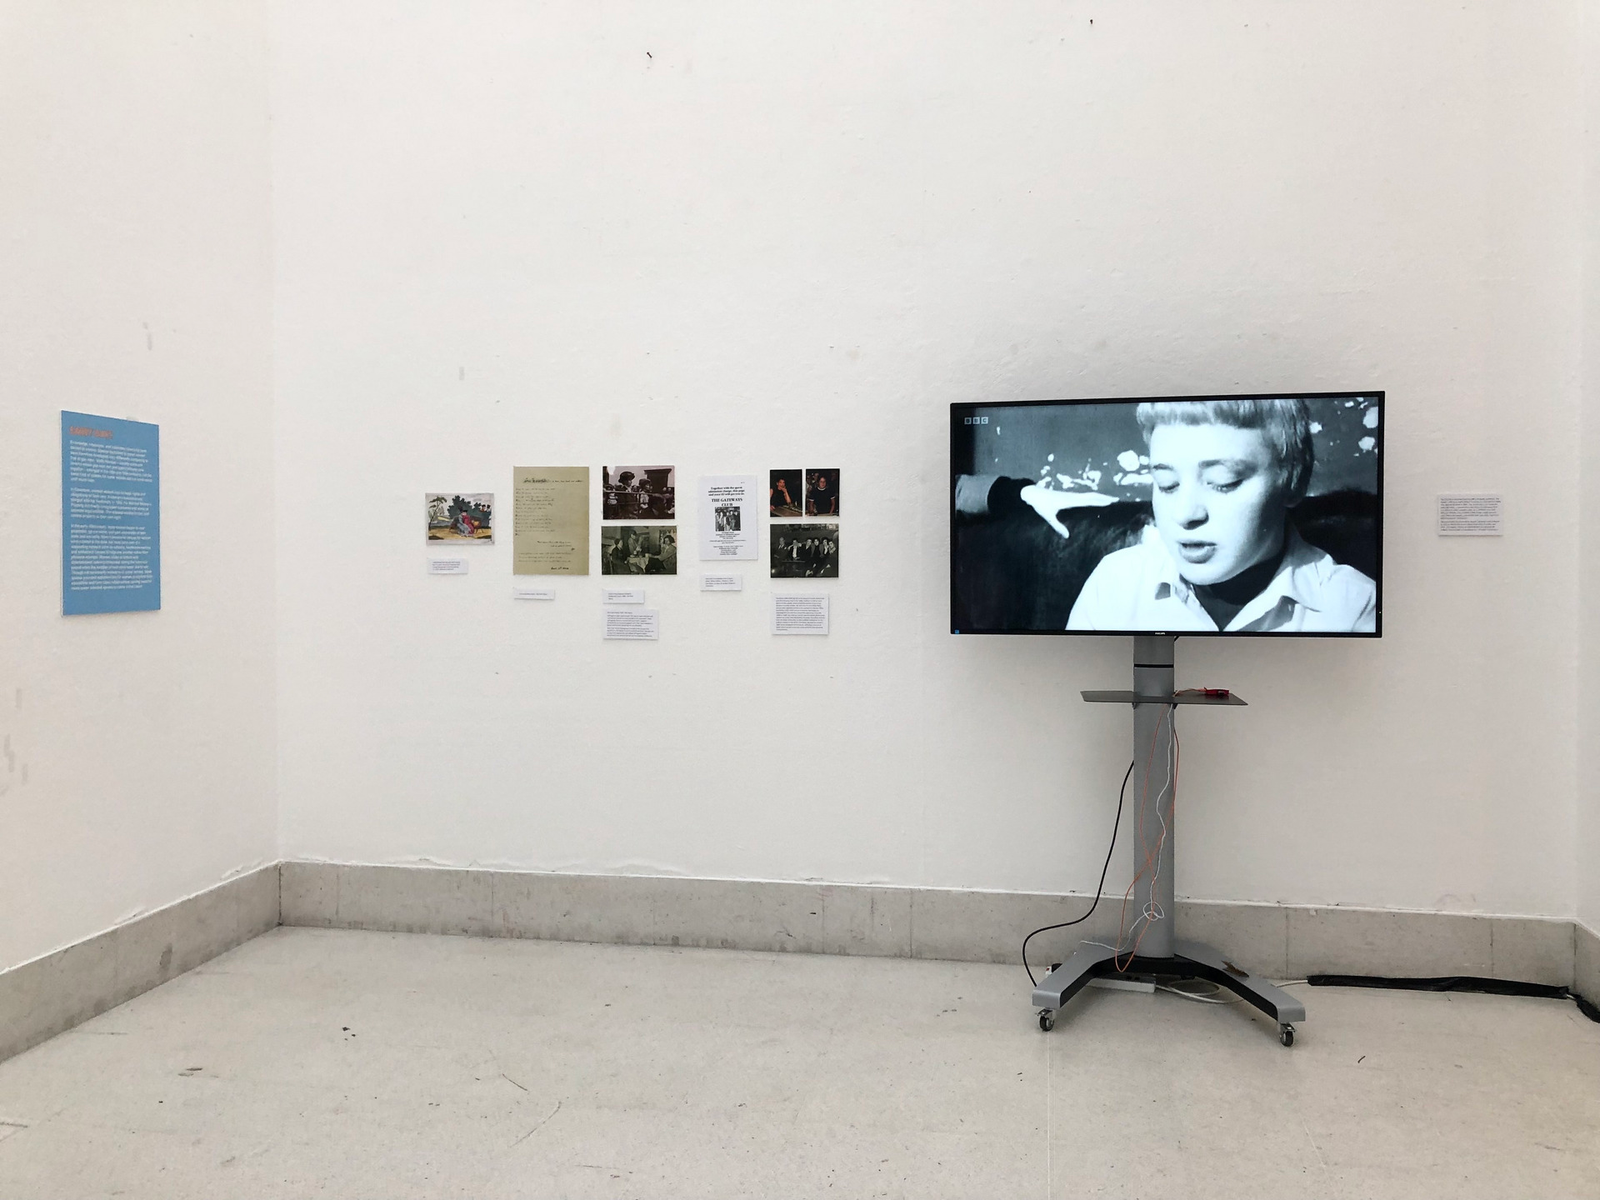 Installation view of the exhibition showing a video clip and some photographic documentation.